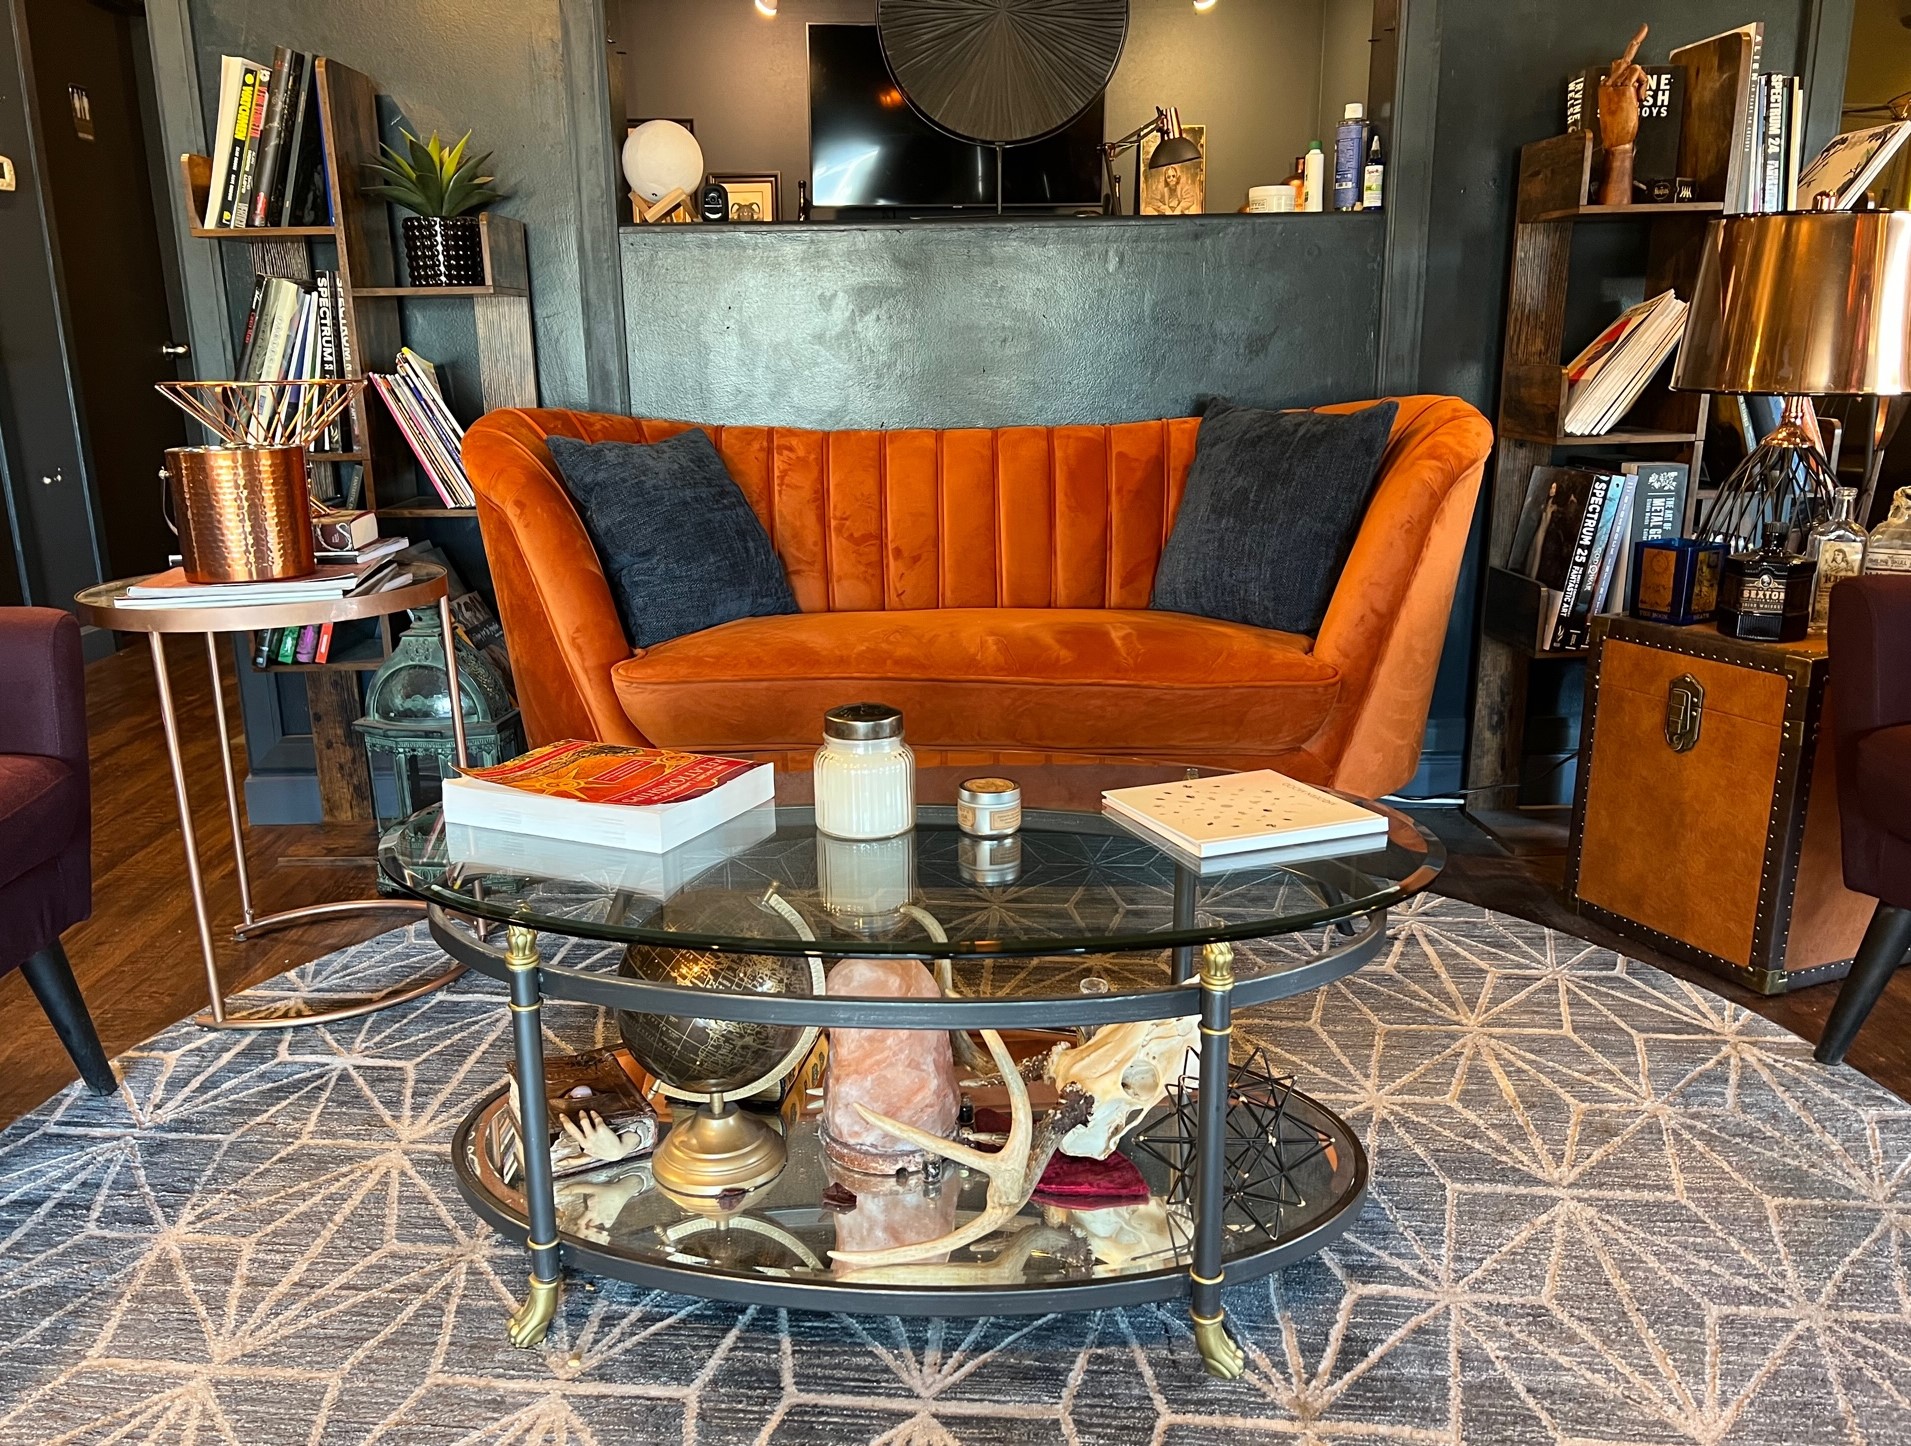 An orange couch sits up against a wall with a window cut out of it. There are bookshelves on either side, and a glass table in front, sitting on a patterned rug. 